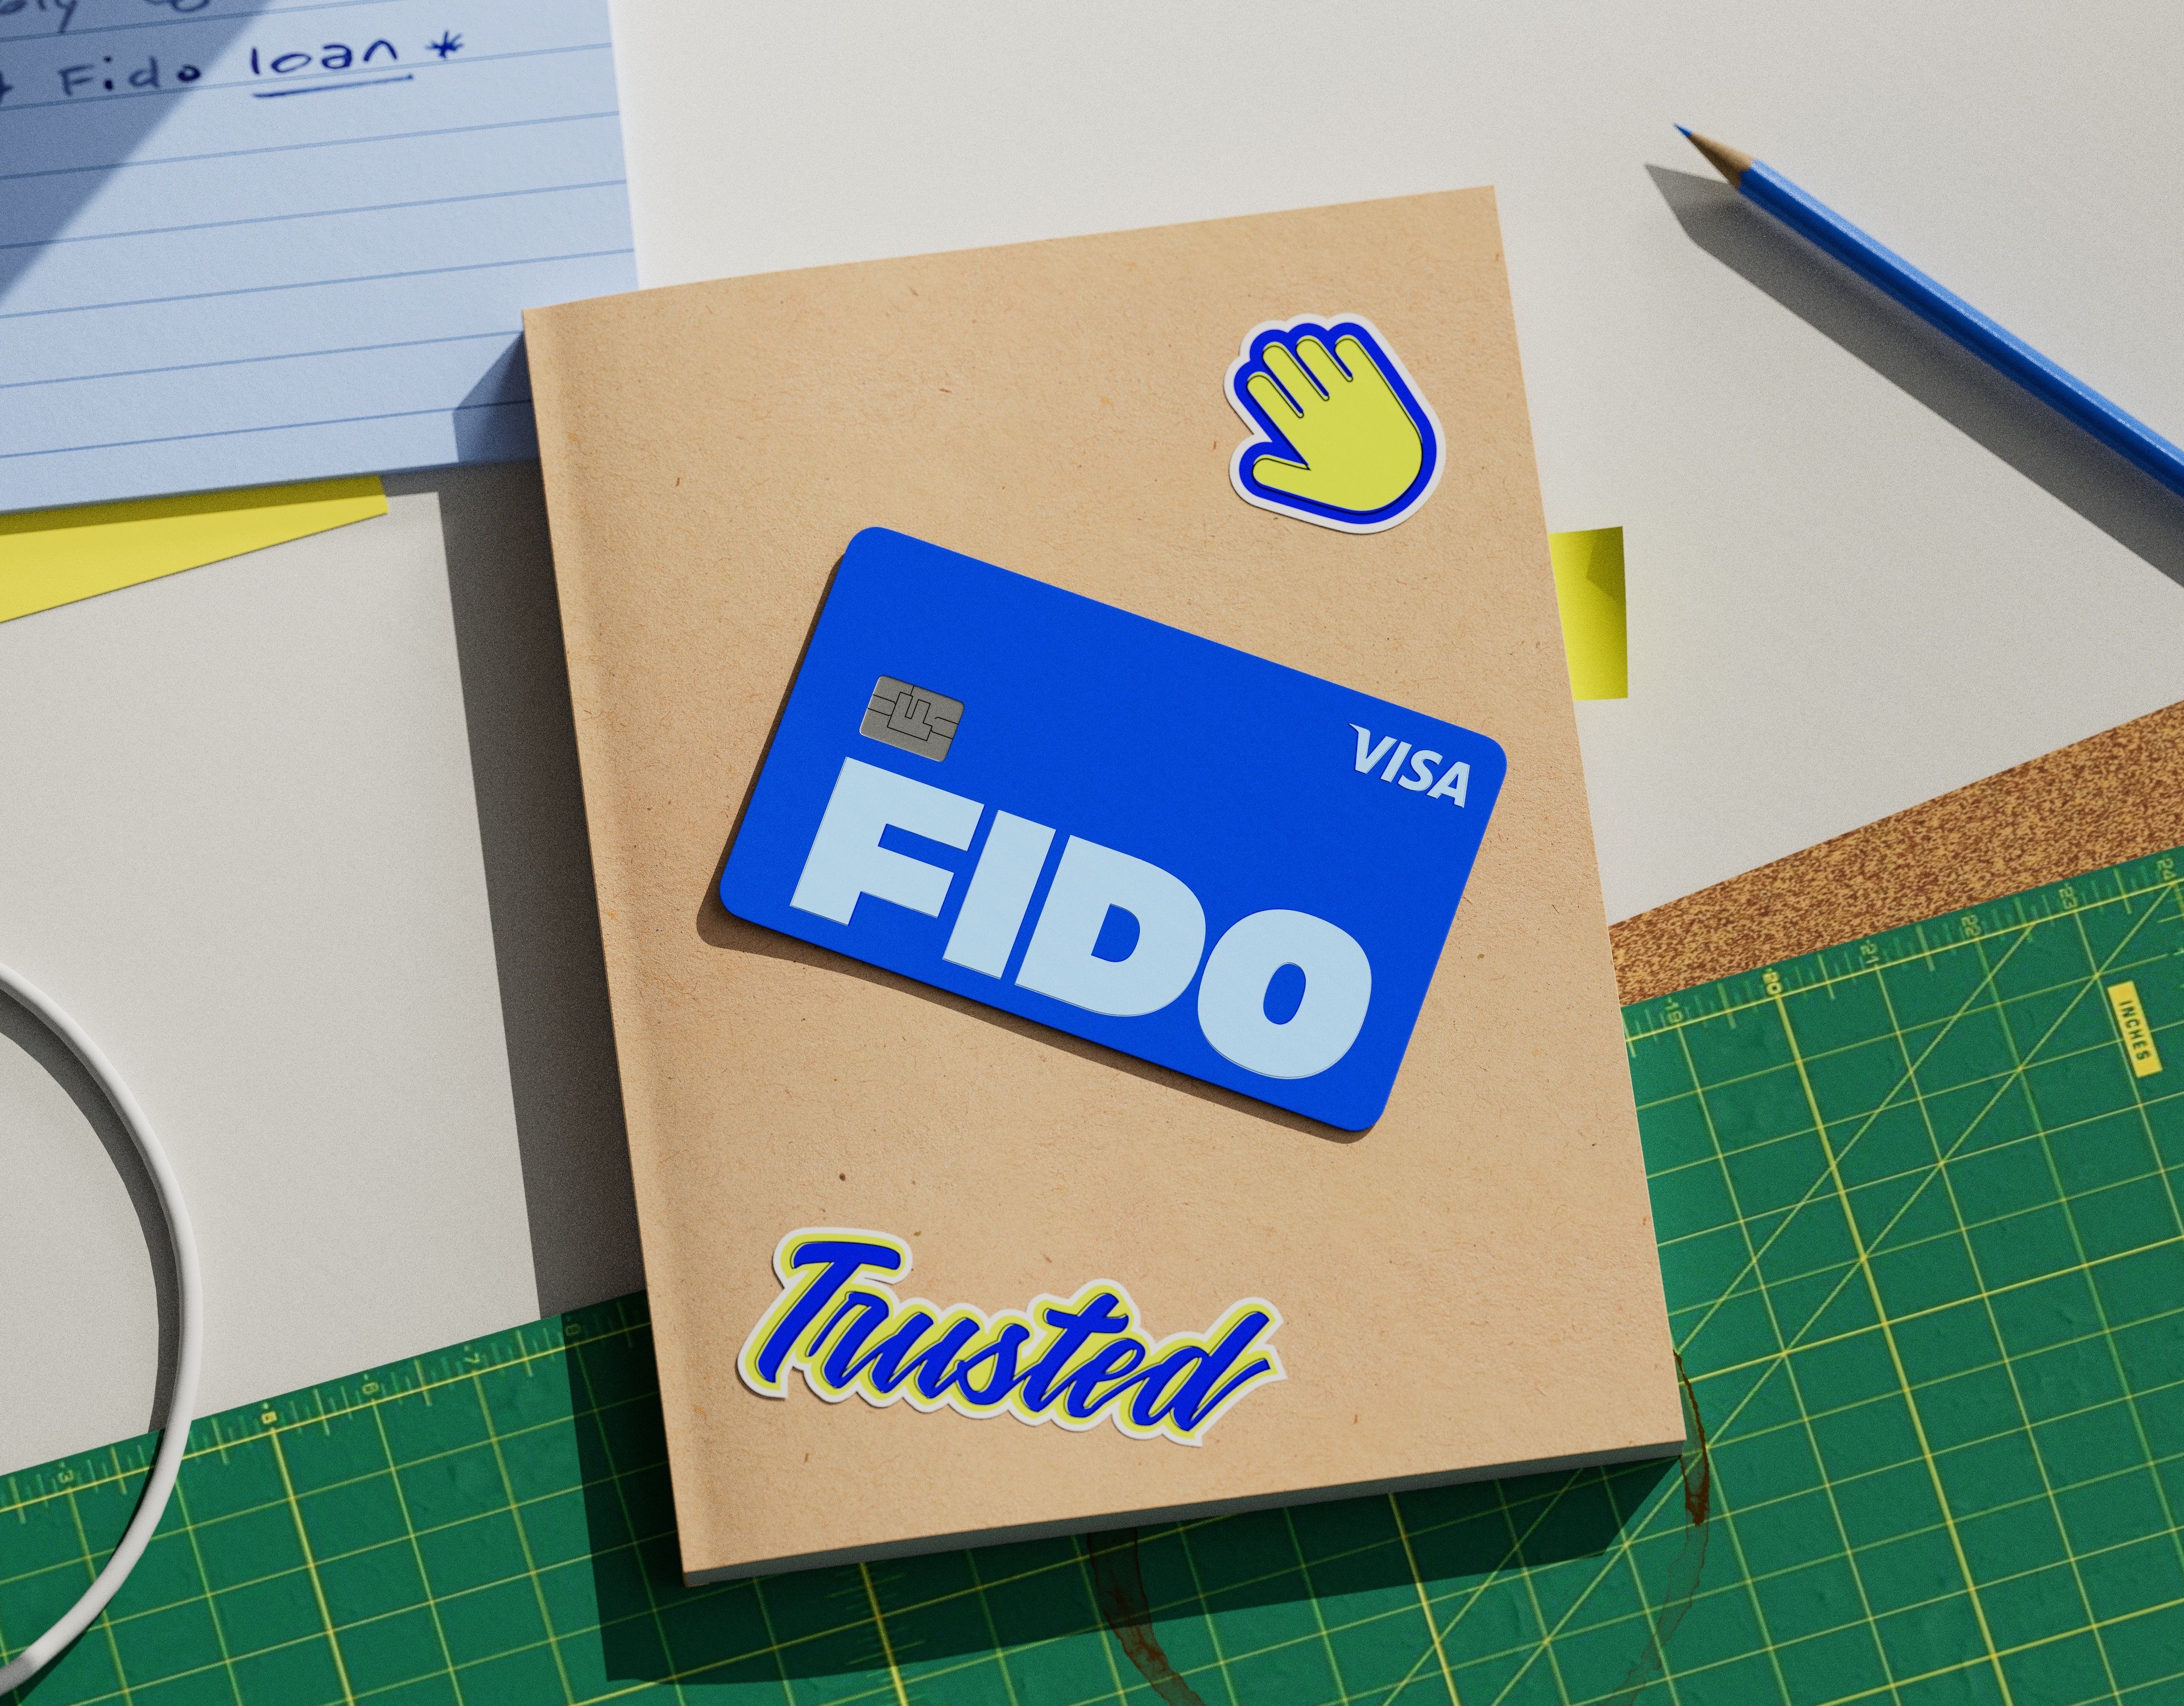 Fido debit card lying on a table surrounded by paper and pencils